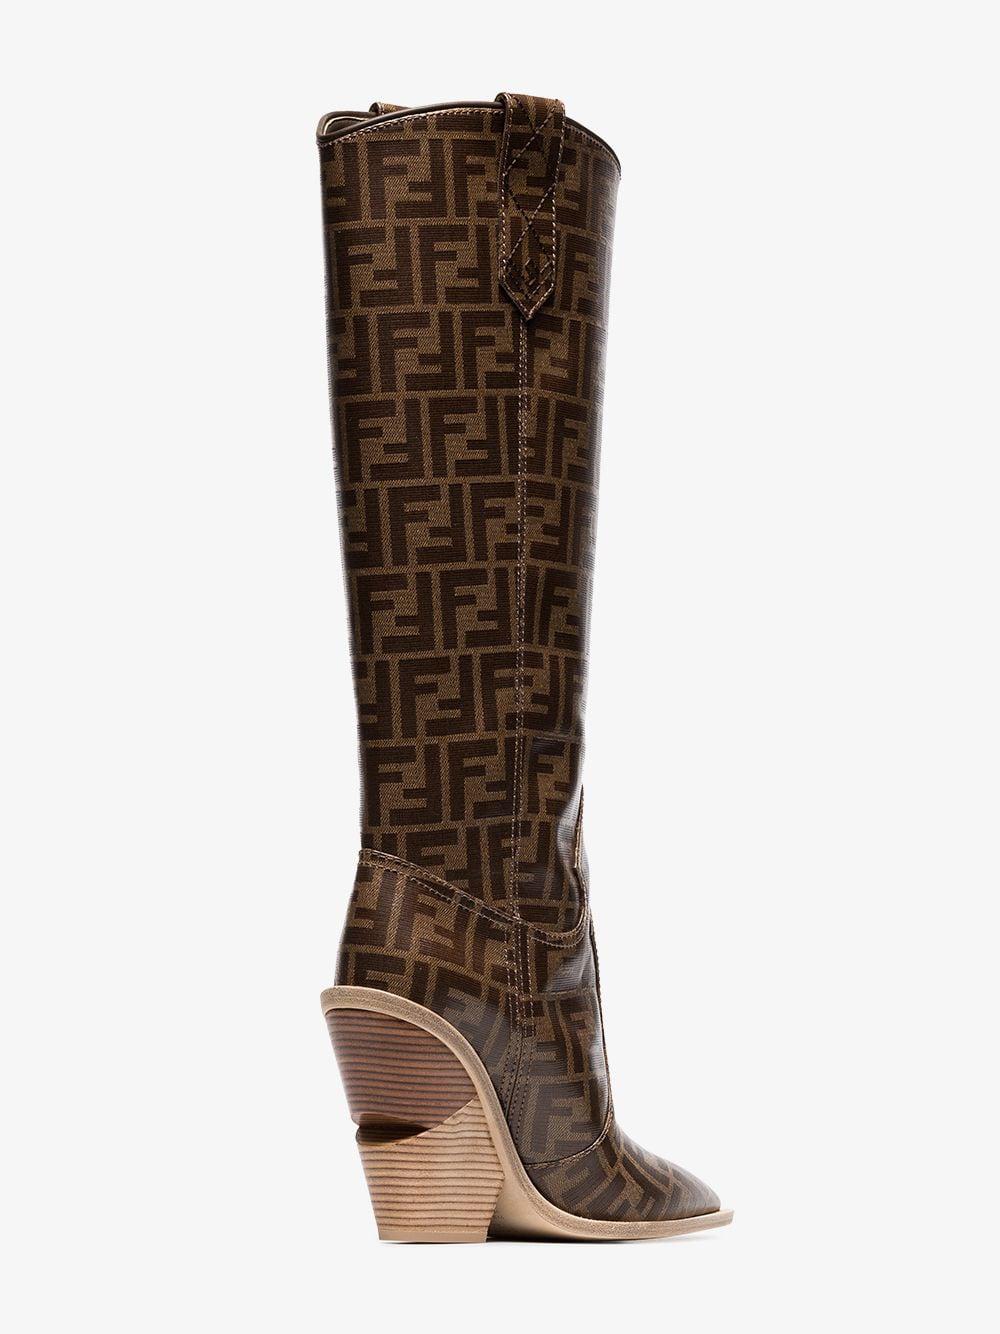 Fendi Canvas Pointed Toe Cowboy Boots in Brown - Lyst